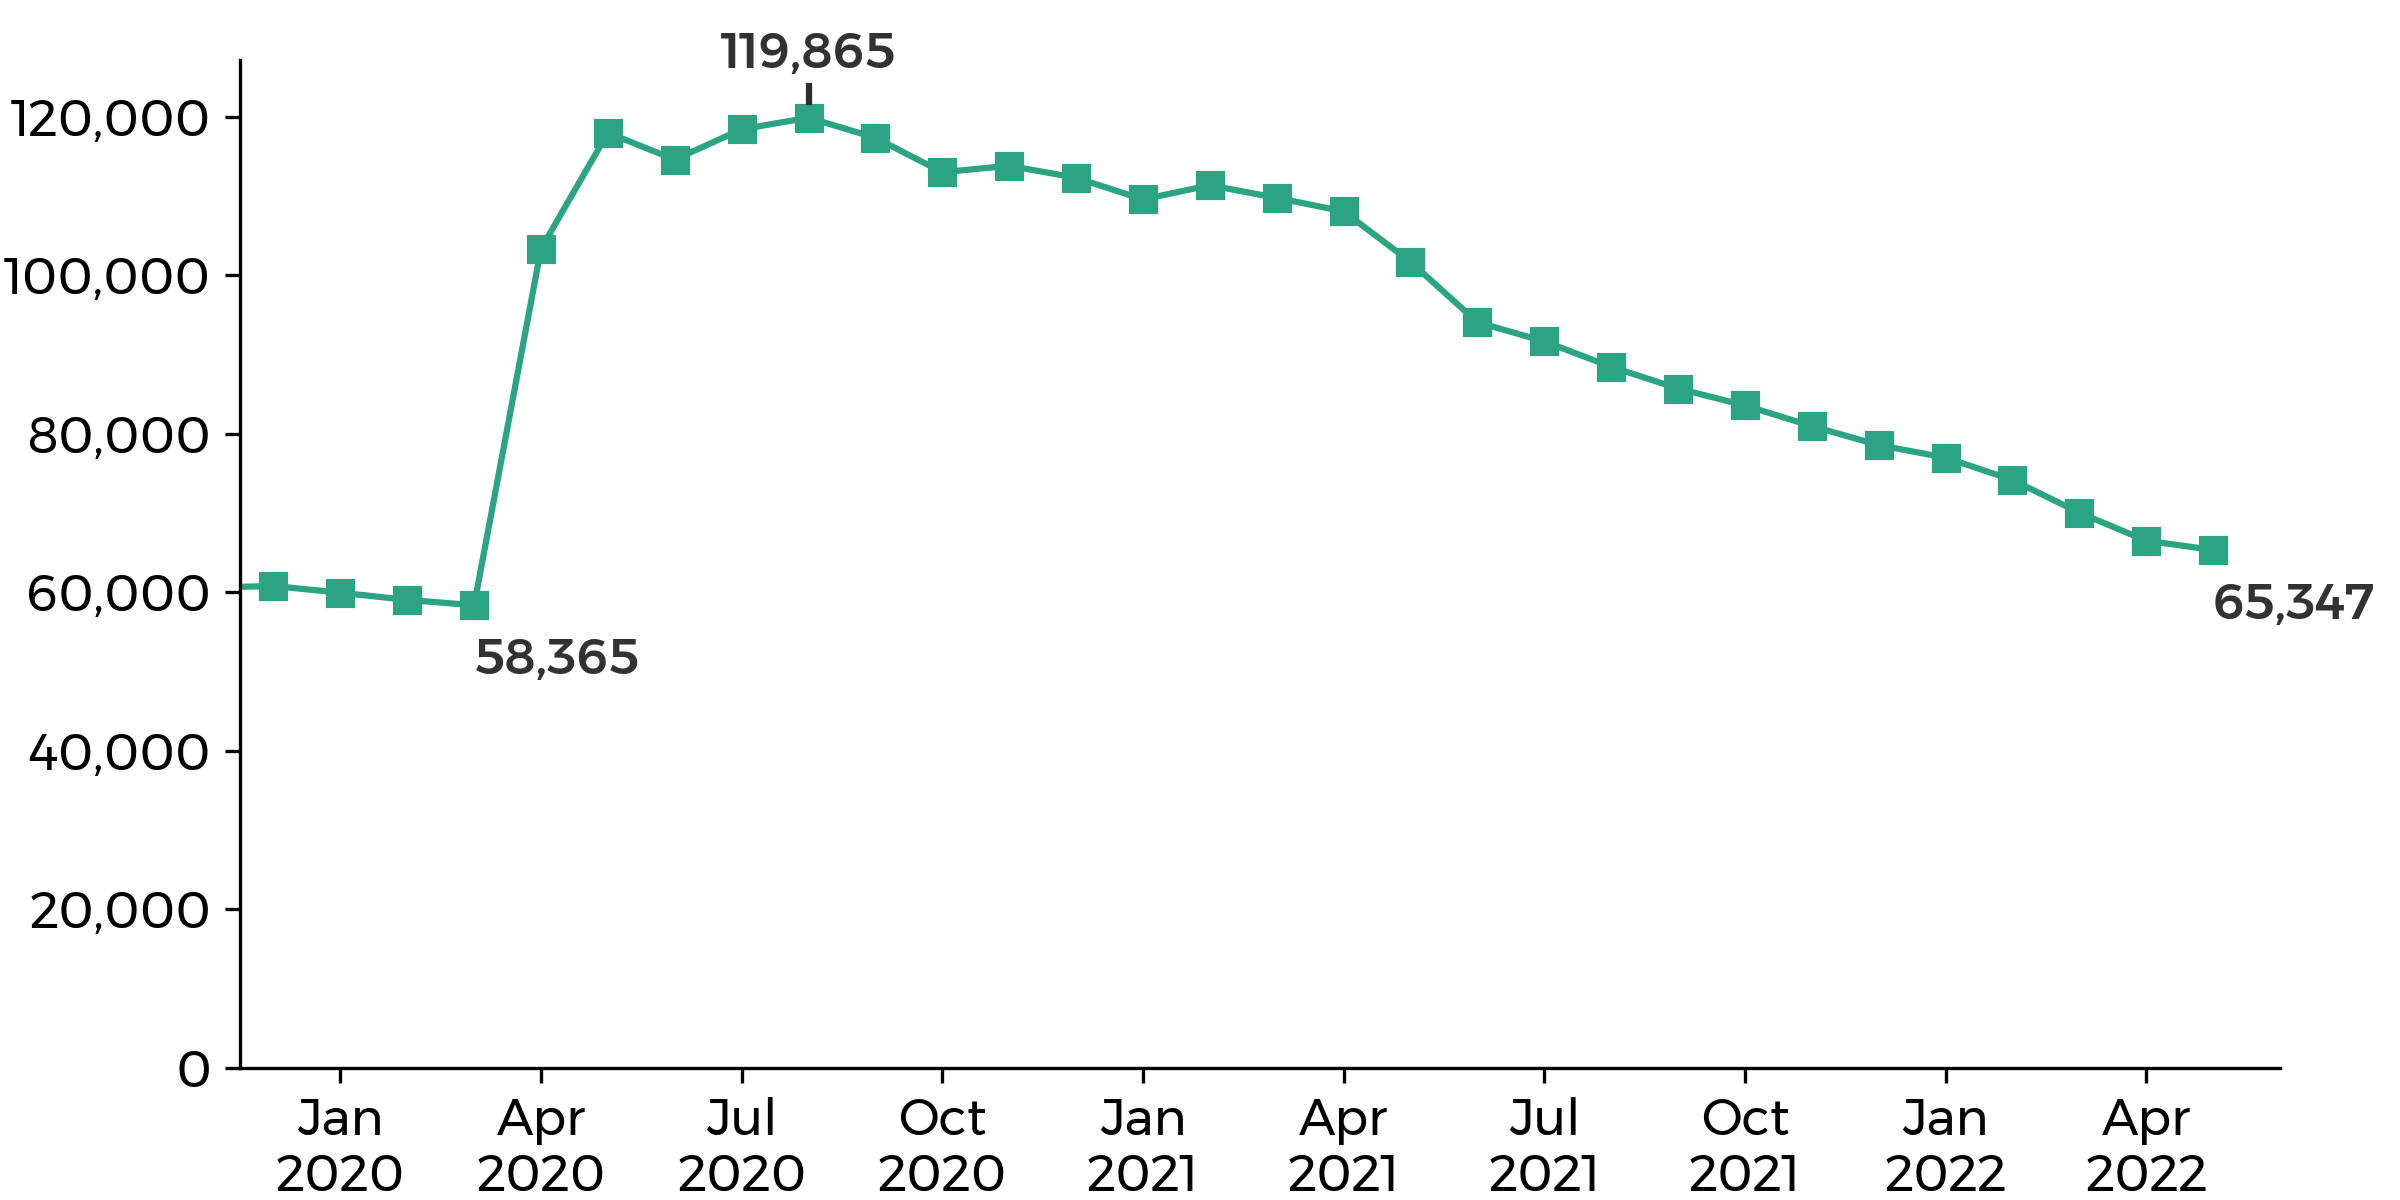 graph showing the Wales claimant count went up from 58,365 in March 2020 to 119,865 in August 2020, then decreasing to 65,347 in May 2022.